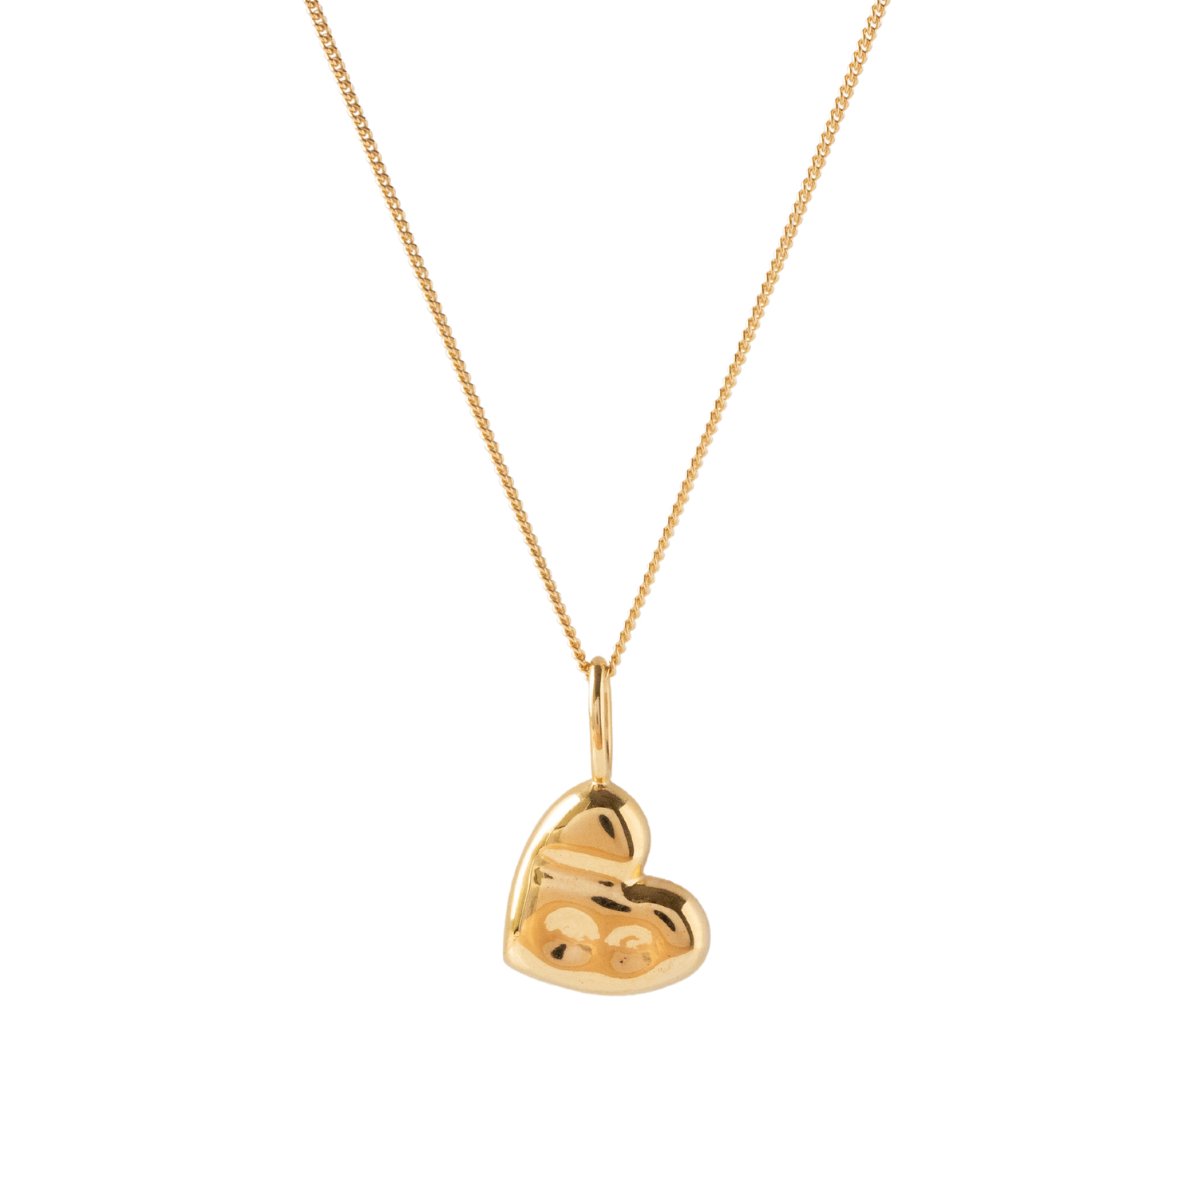 FEARLESS HEART PENDANT NECKLACE - GOLD - SO PRETTY CARA COTTER